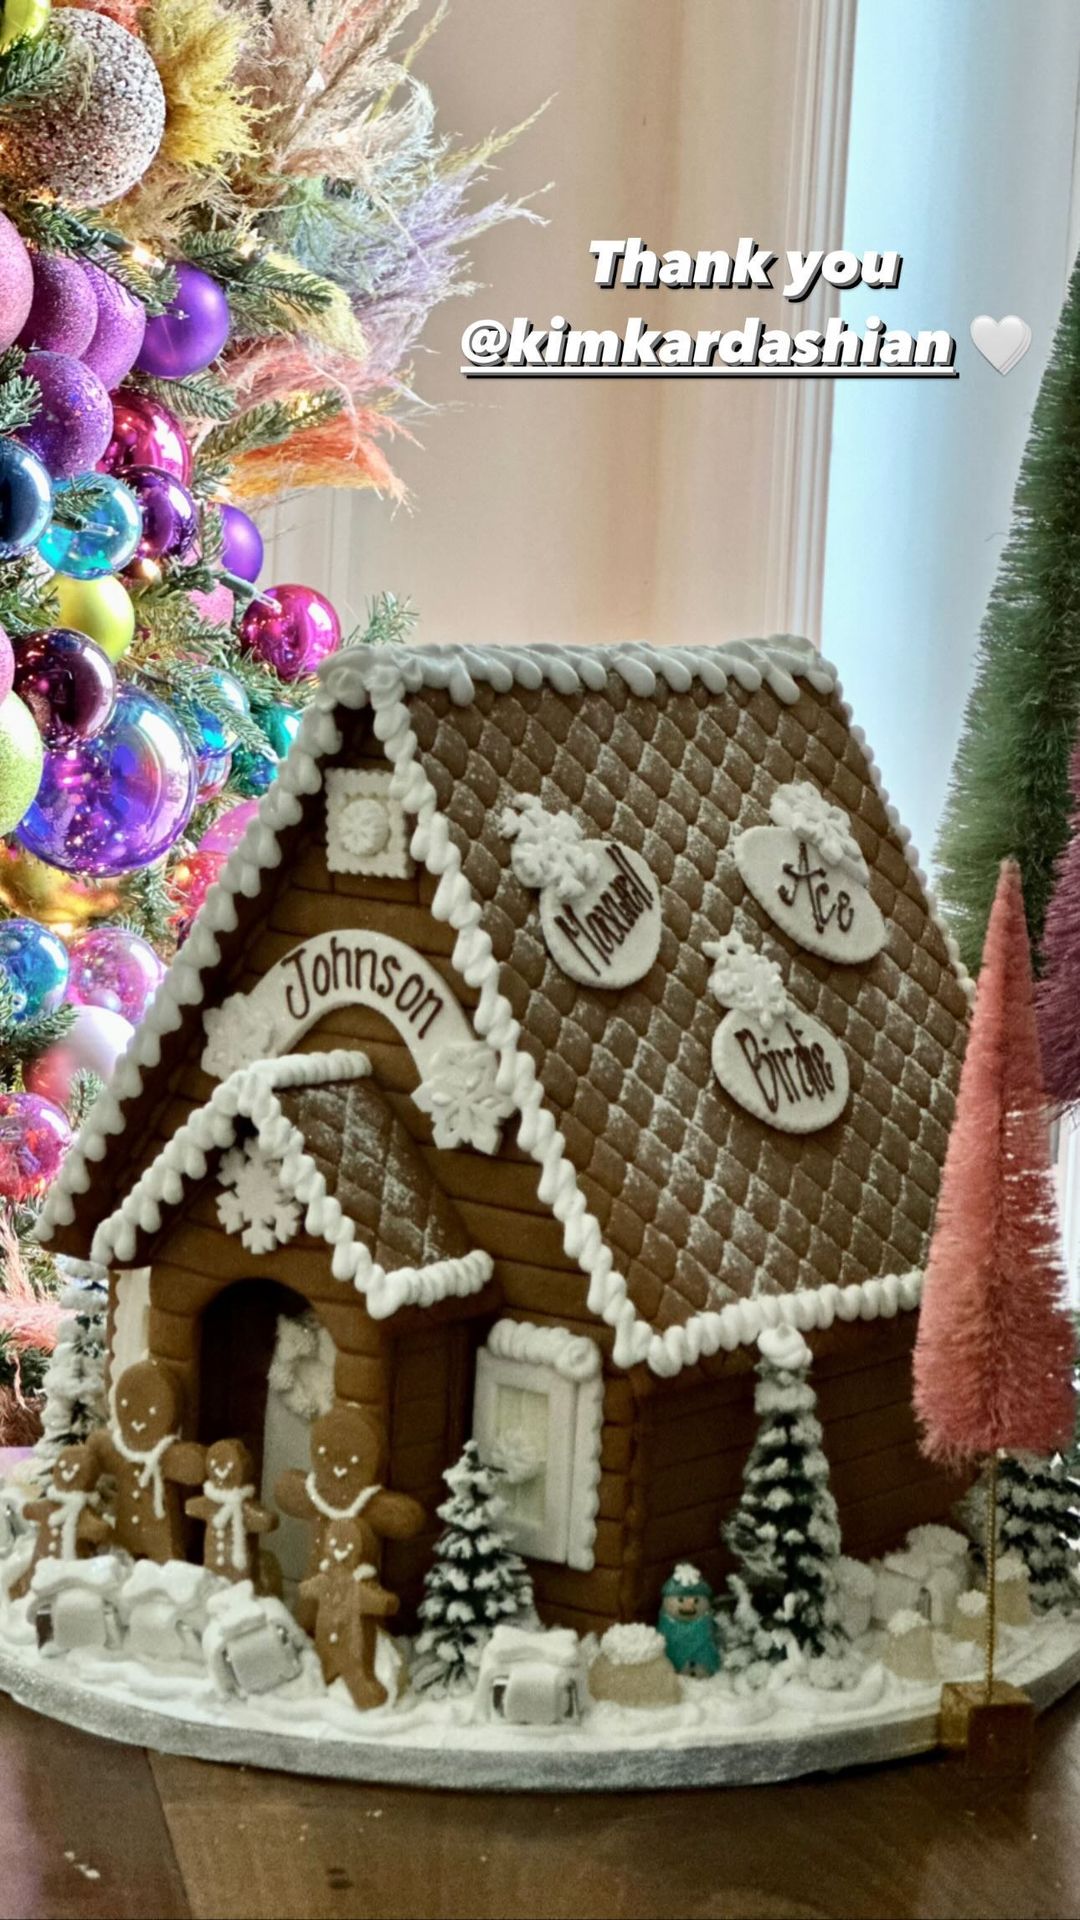 Jessica's shared snap pictured a large decorated gingerbread house